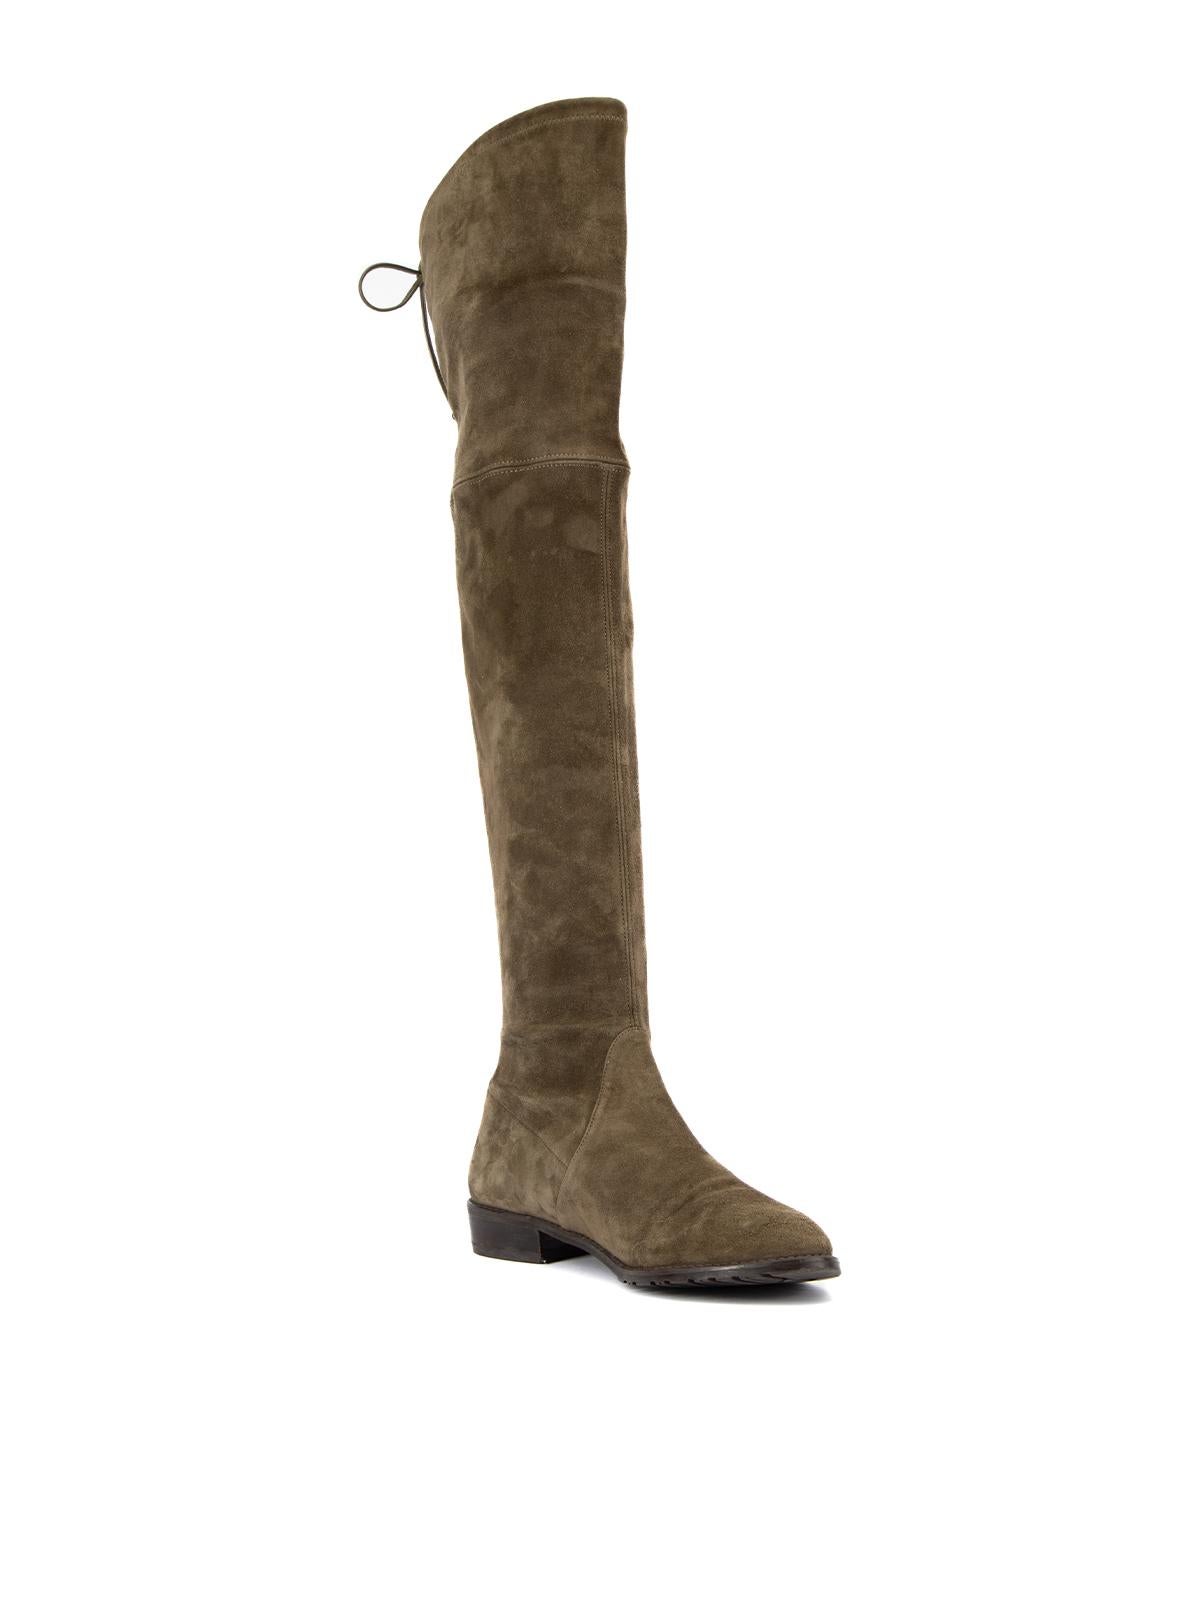 CONDITION is Good. Minor wear to bootsis evident. Light wear to outer suede fabric on this used Stuart Weitzmann designer resale item. Details Olive green Suede Over the knee boots Almond toe Slight heel Tie top Made in Spain Composition EXTERIOR: